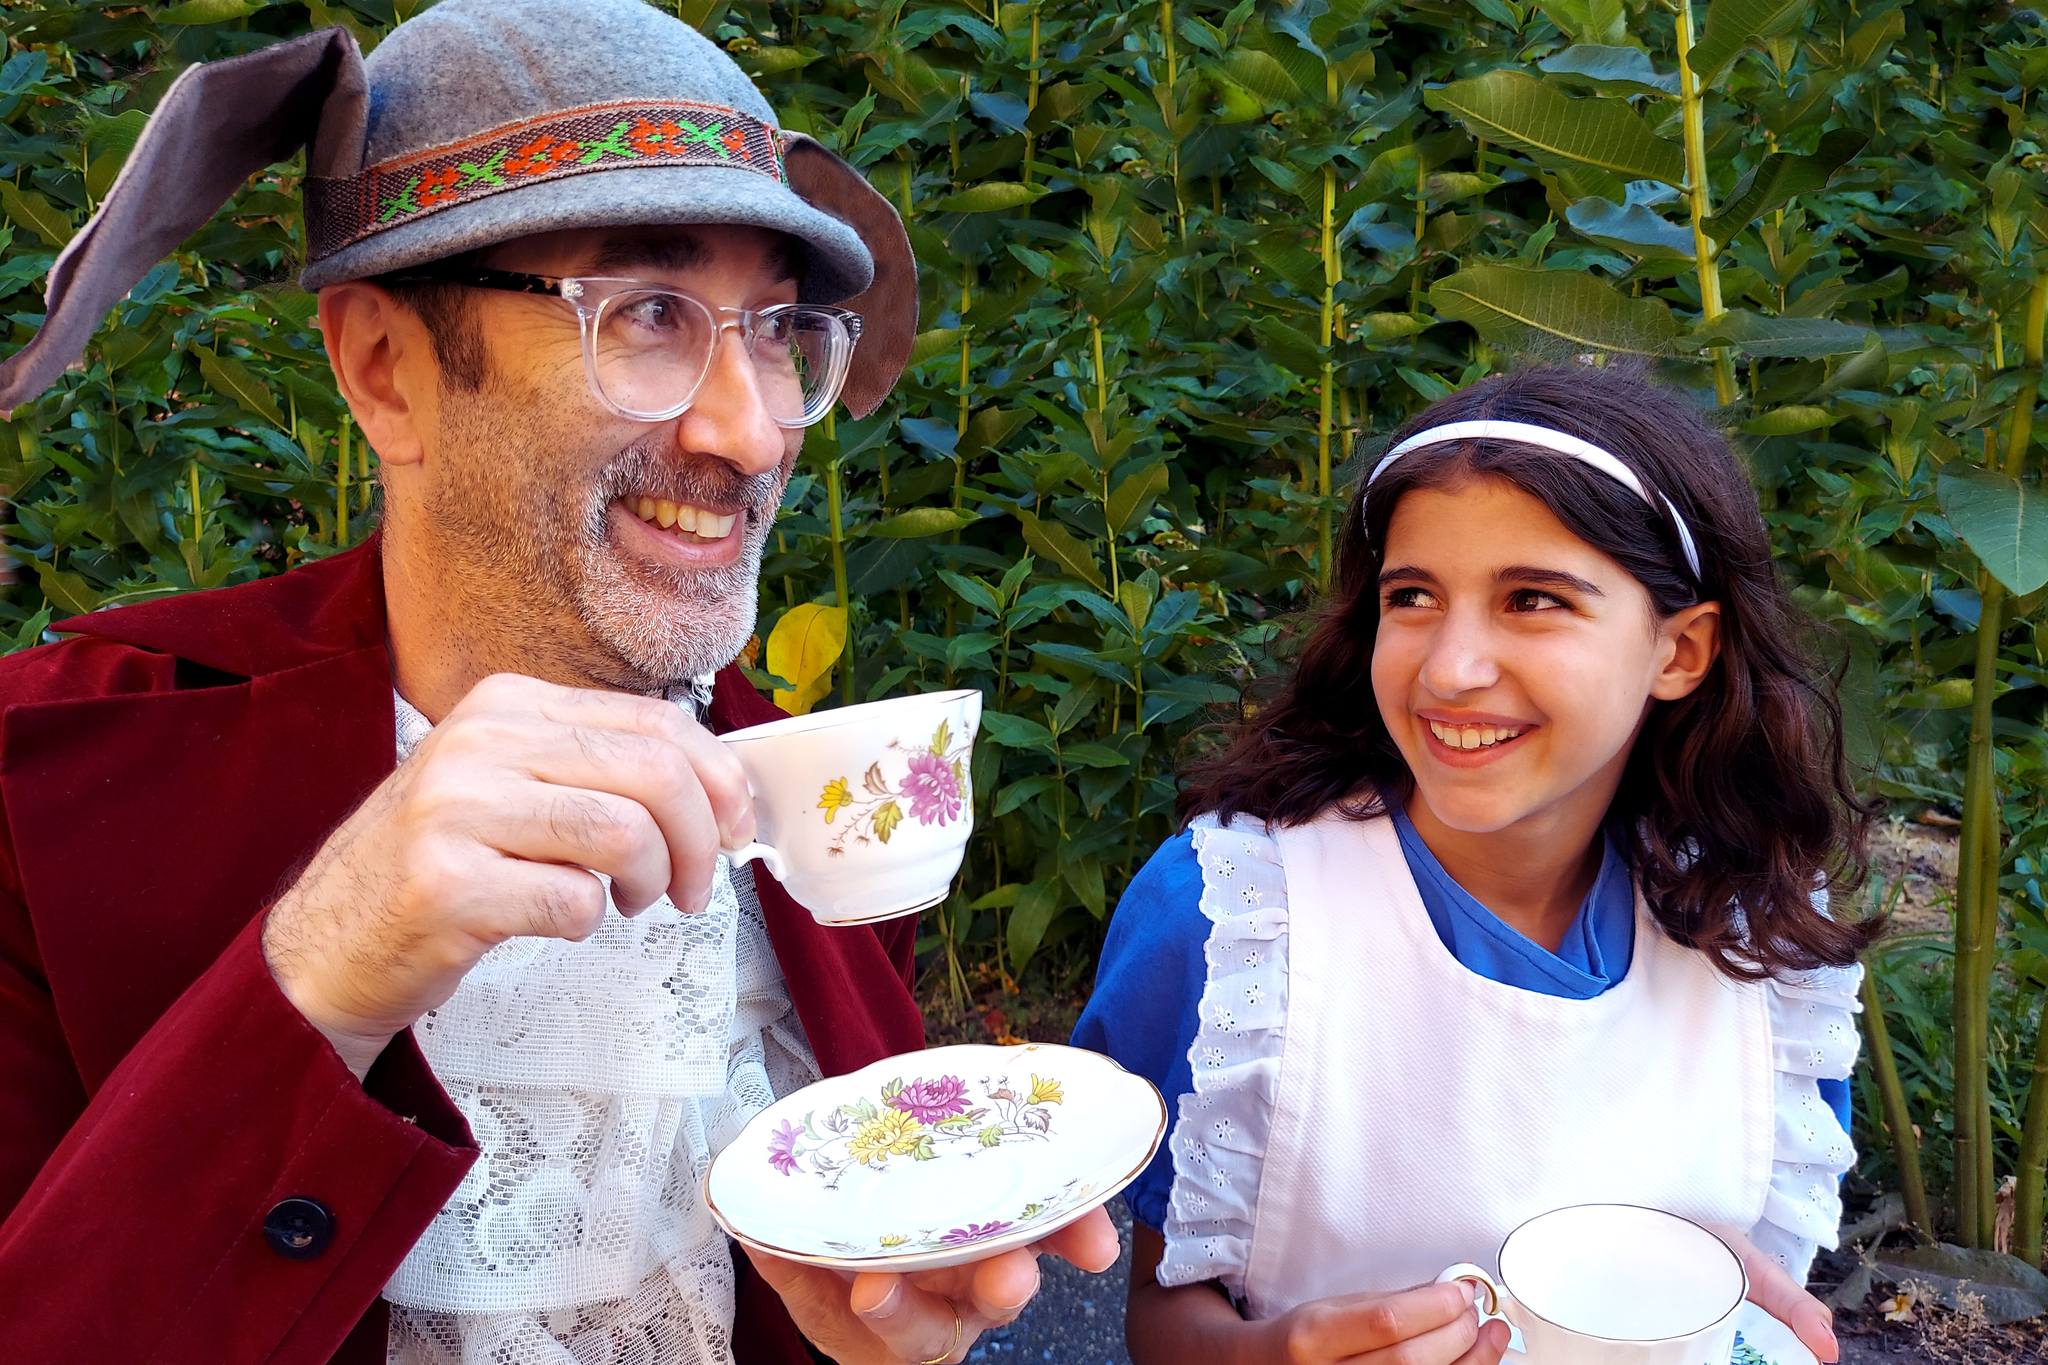 A man wearing a rabbit hat drinks tea with a girl dressed as Alice in Wonderland